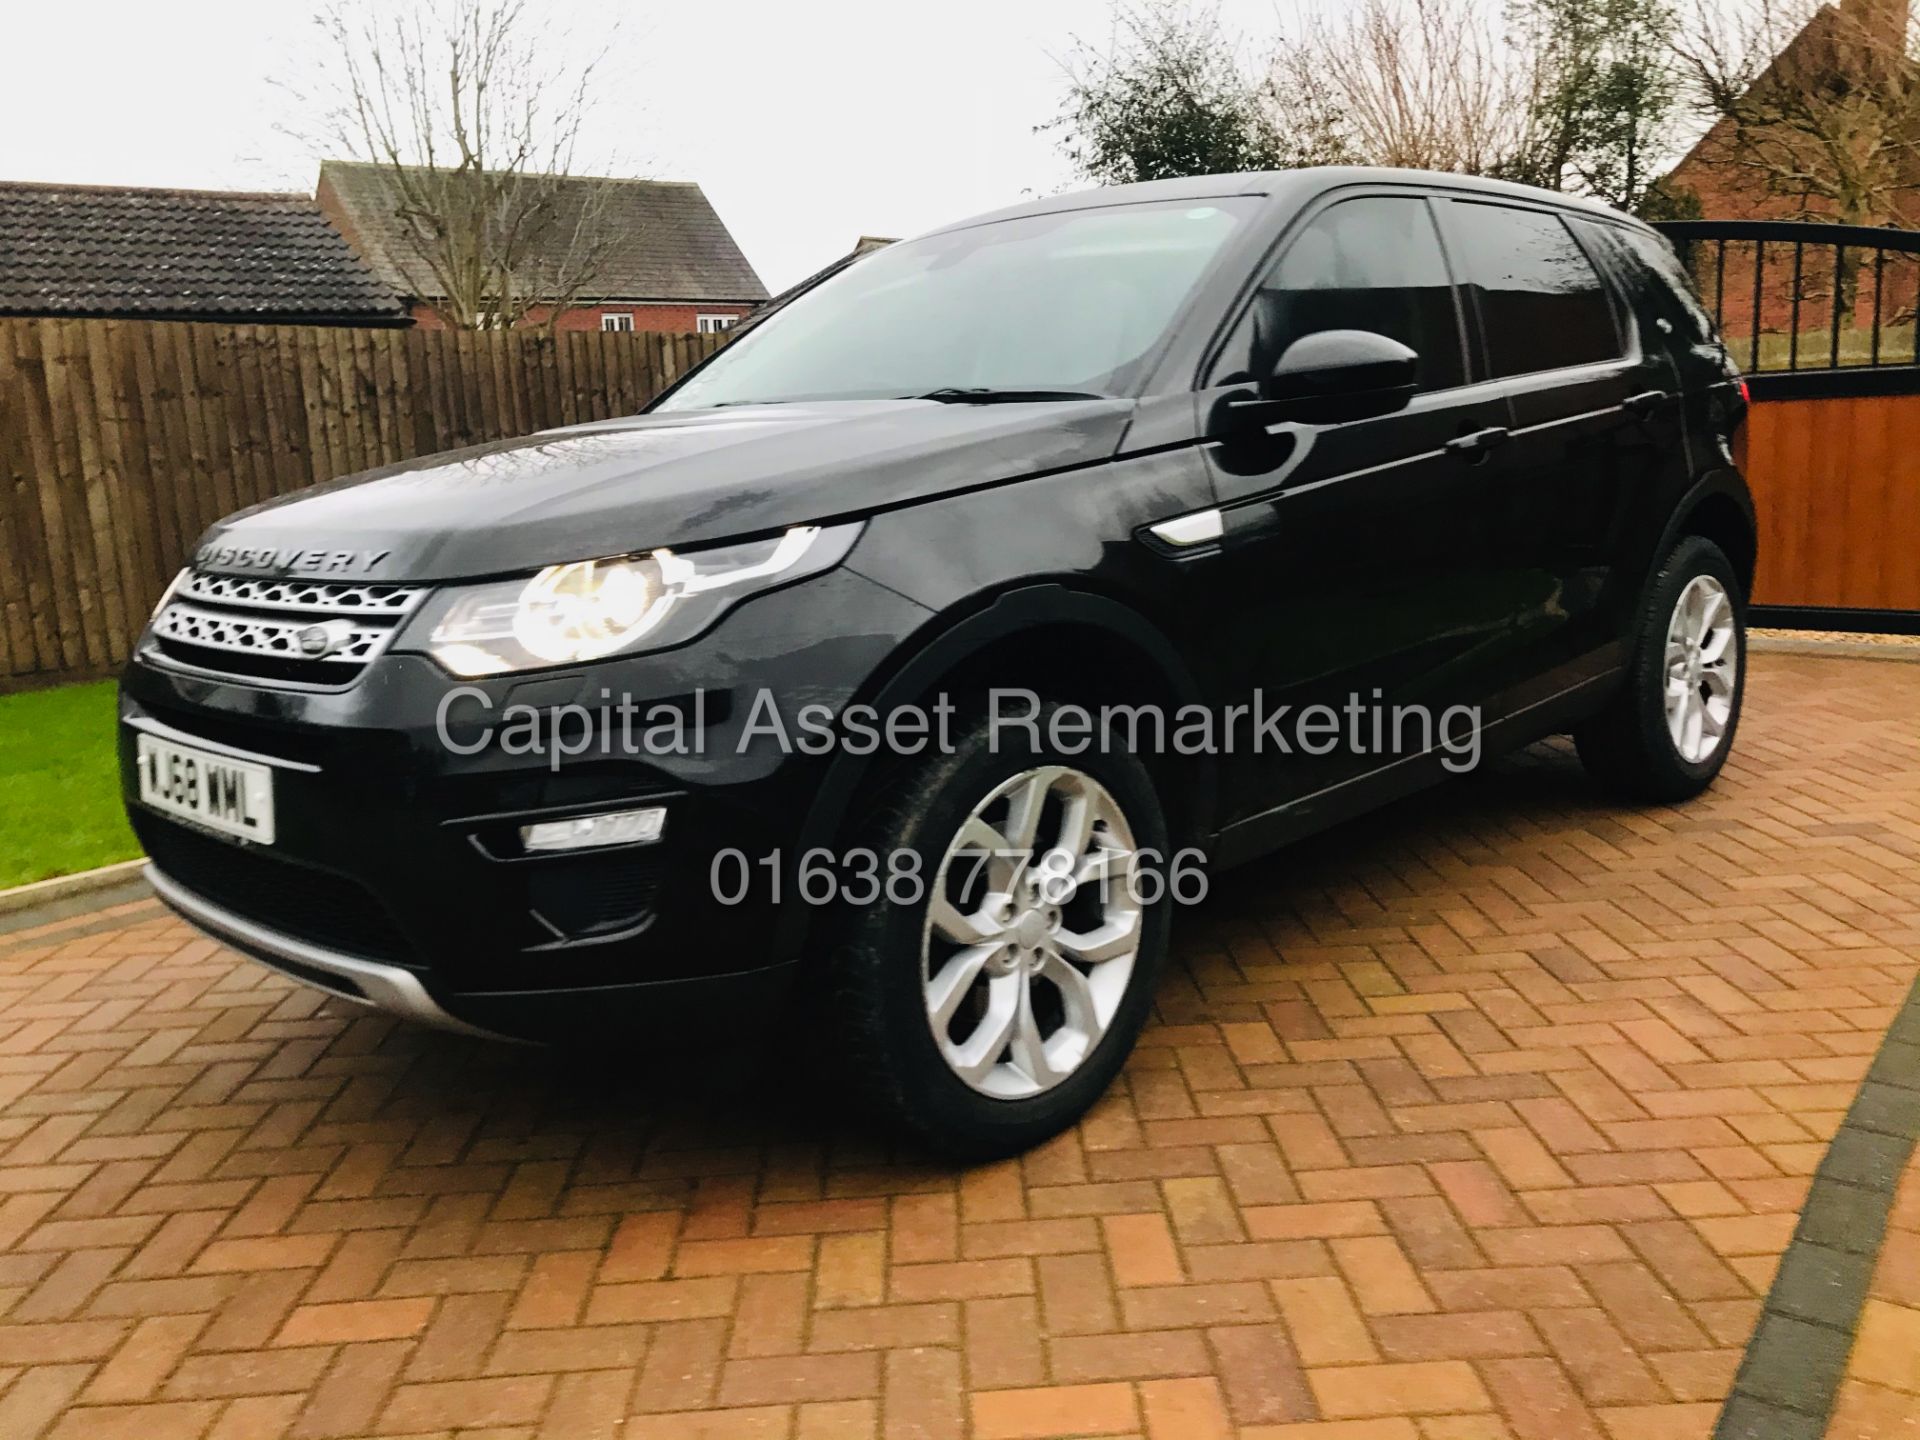 ON SALE LAND ROVER DISCOVERY SPORT "HSE" AUTO 7 SEATER (2019 MODEL) - SAT NAV -LEATHER *PAN ROOF* - Image 5 of 35